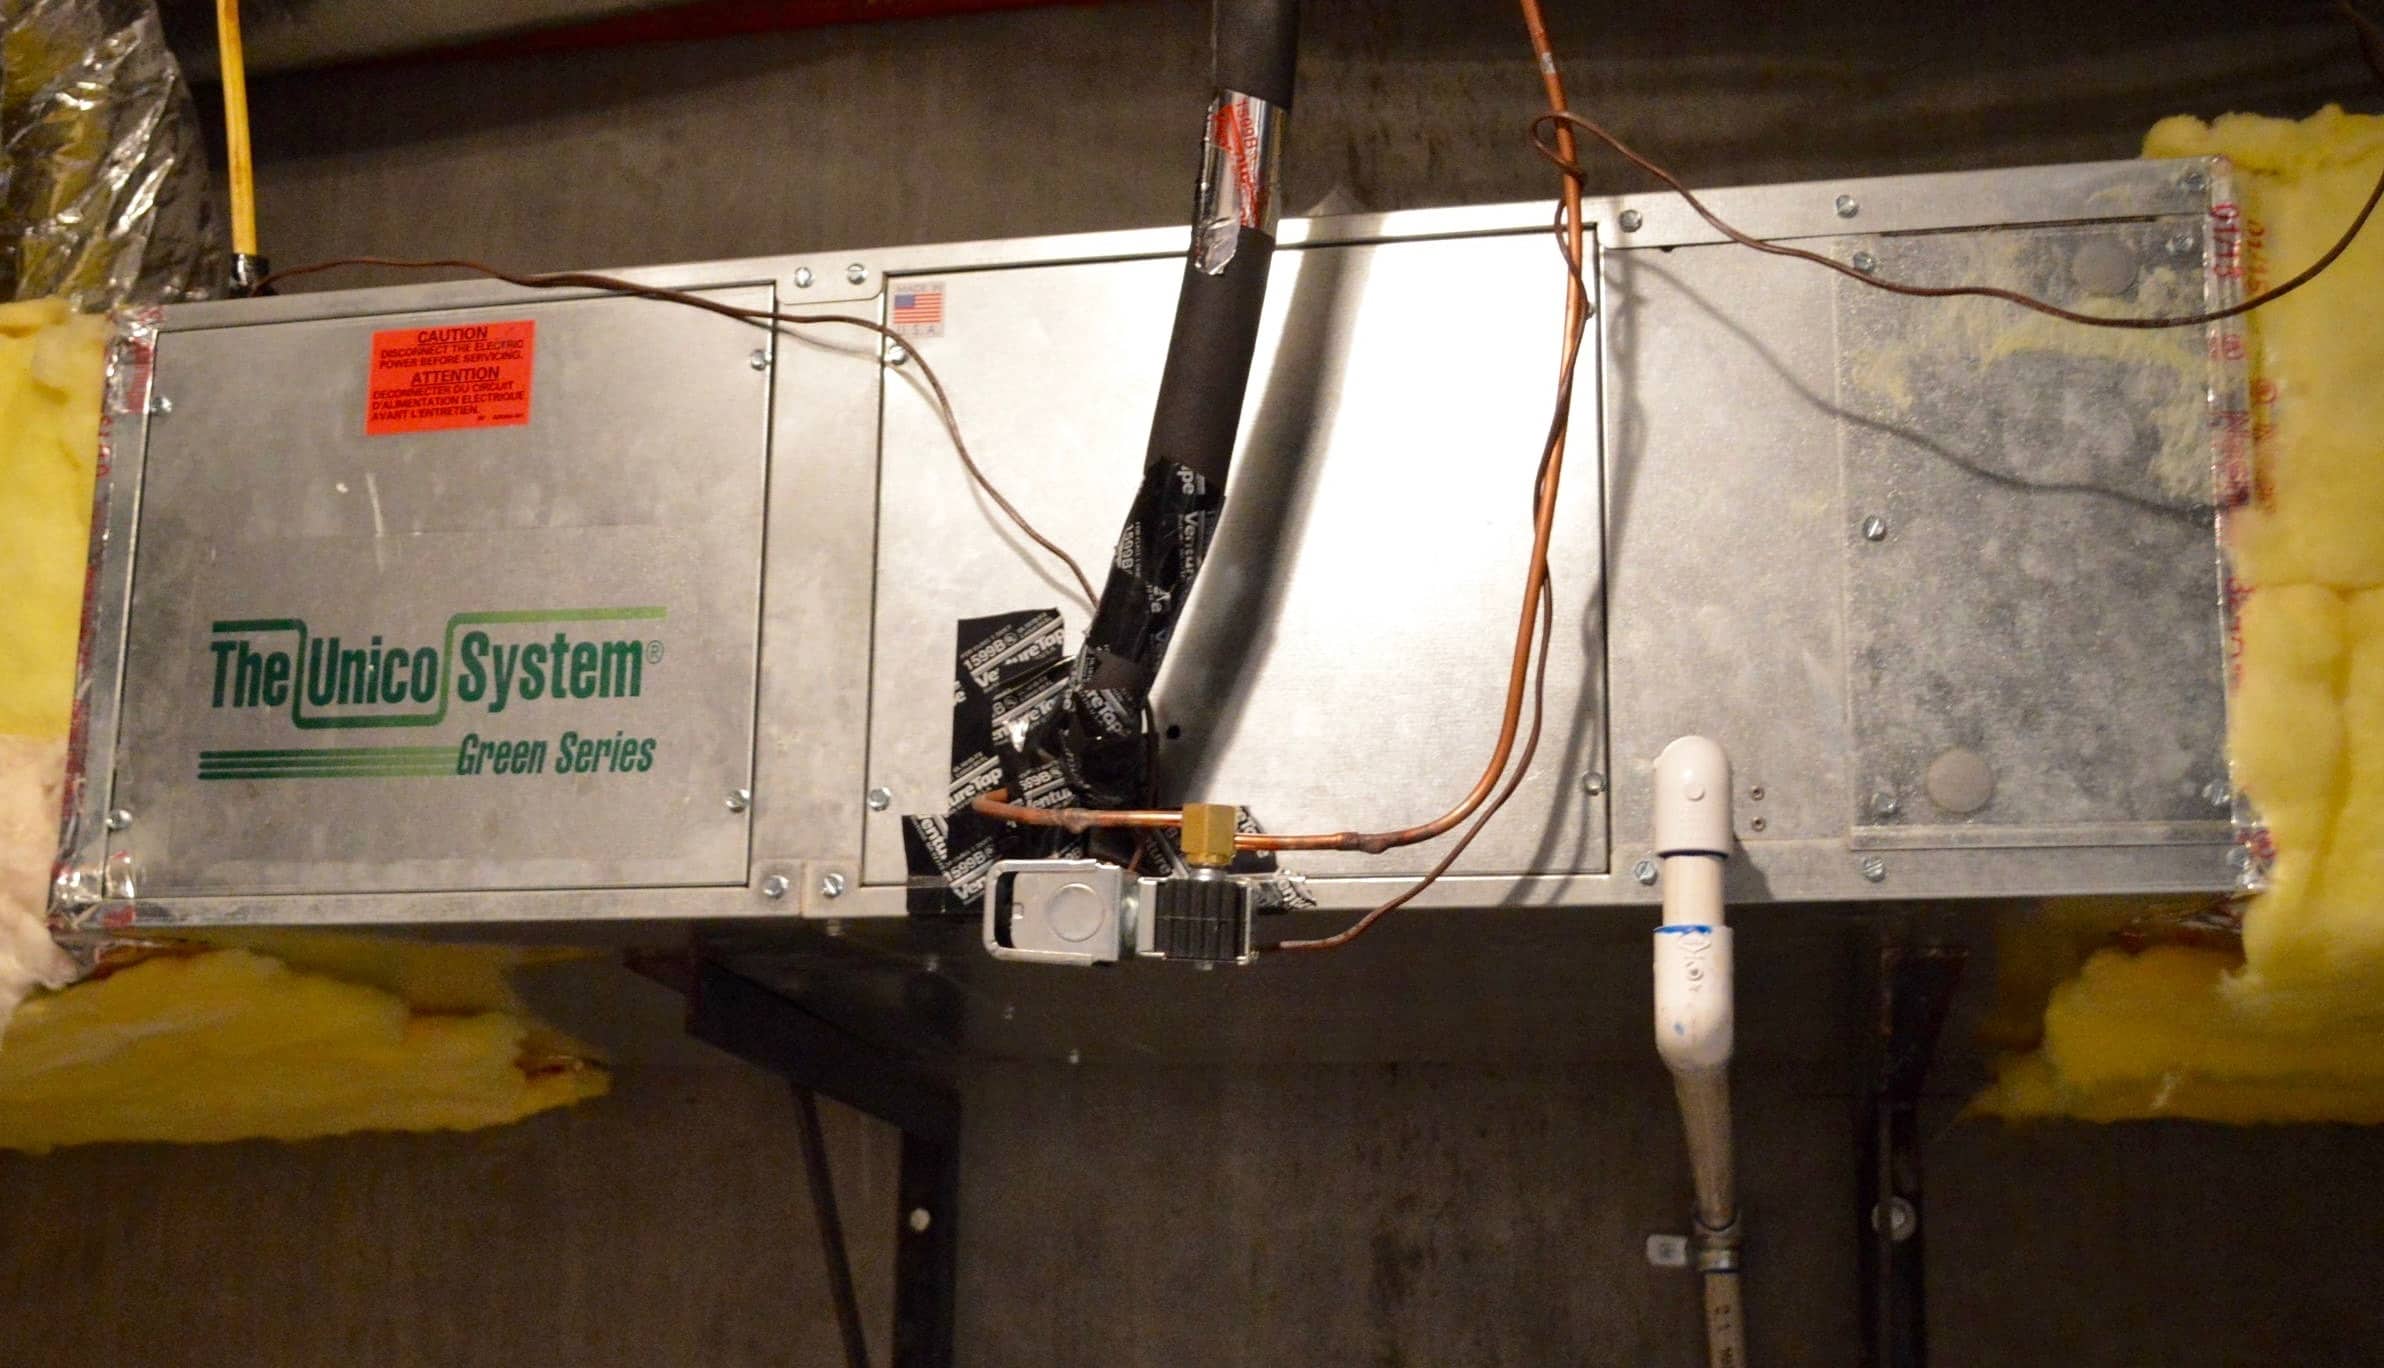 Read more about where this HVAC unit was installed!